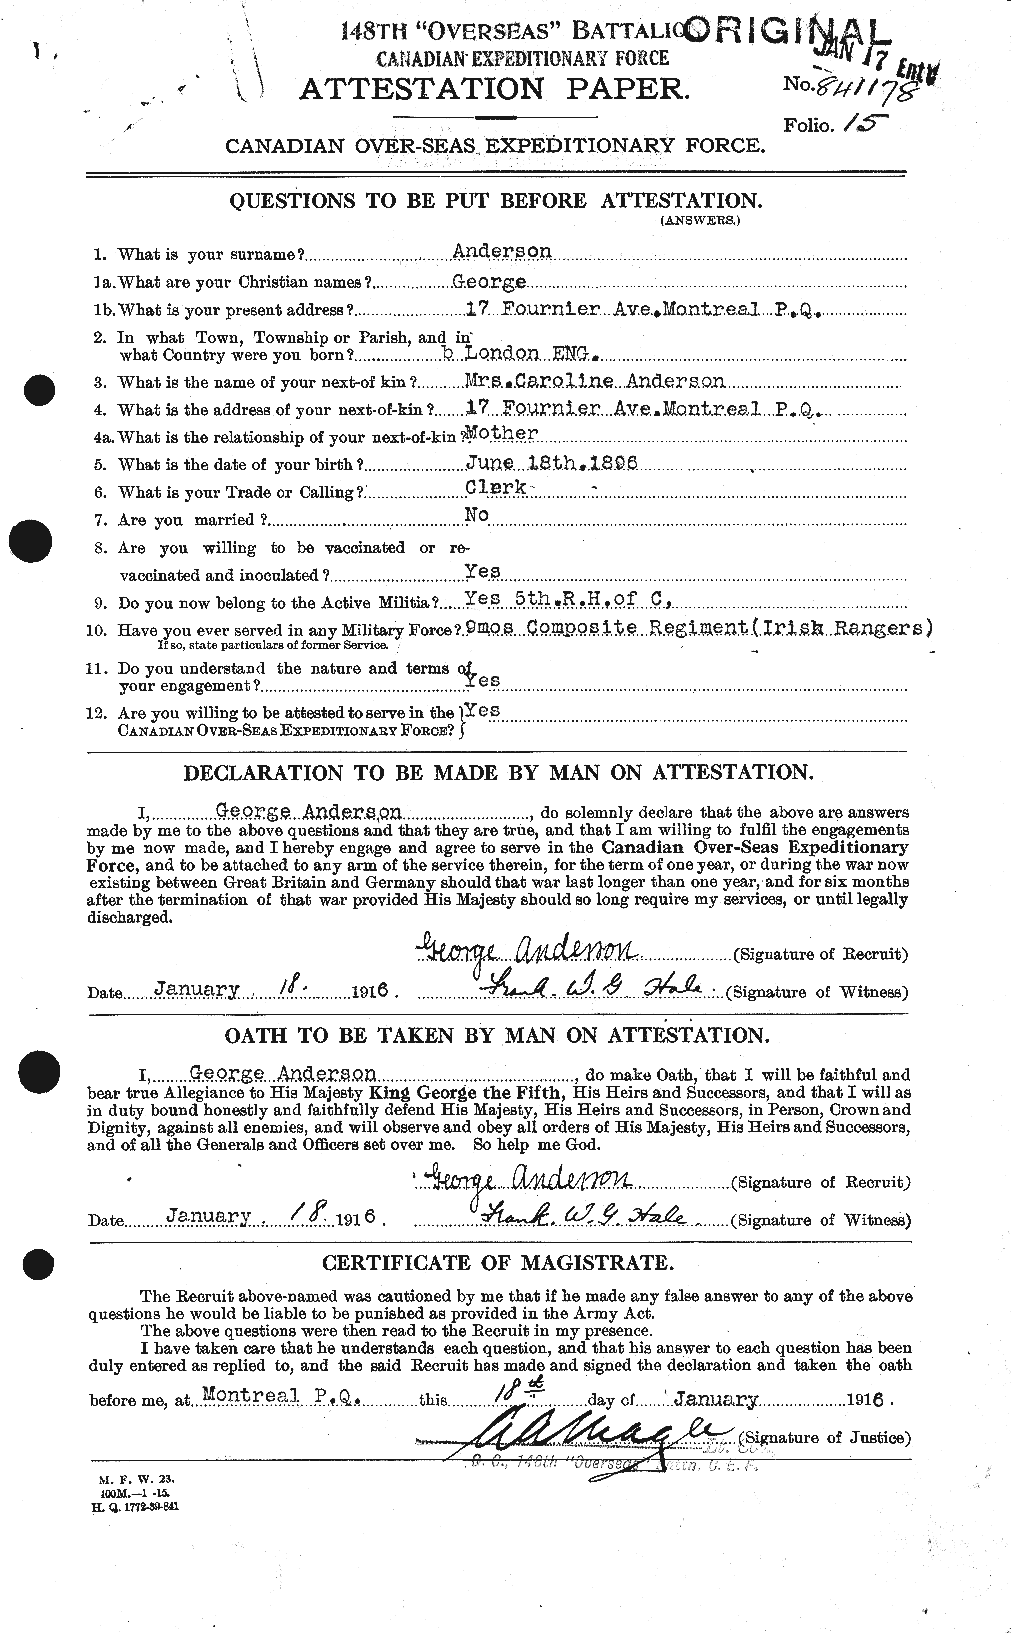 Personnel Records of the First World War - CEF 209747a